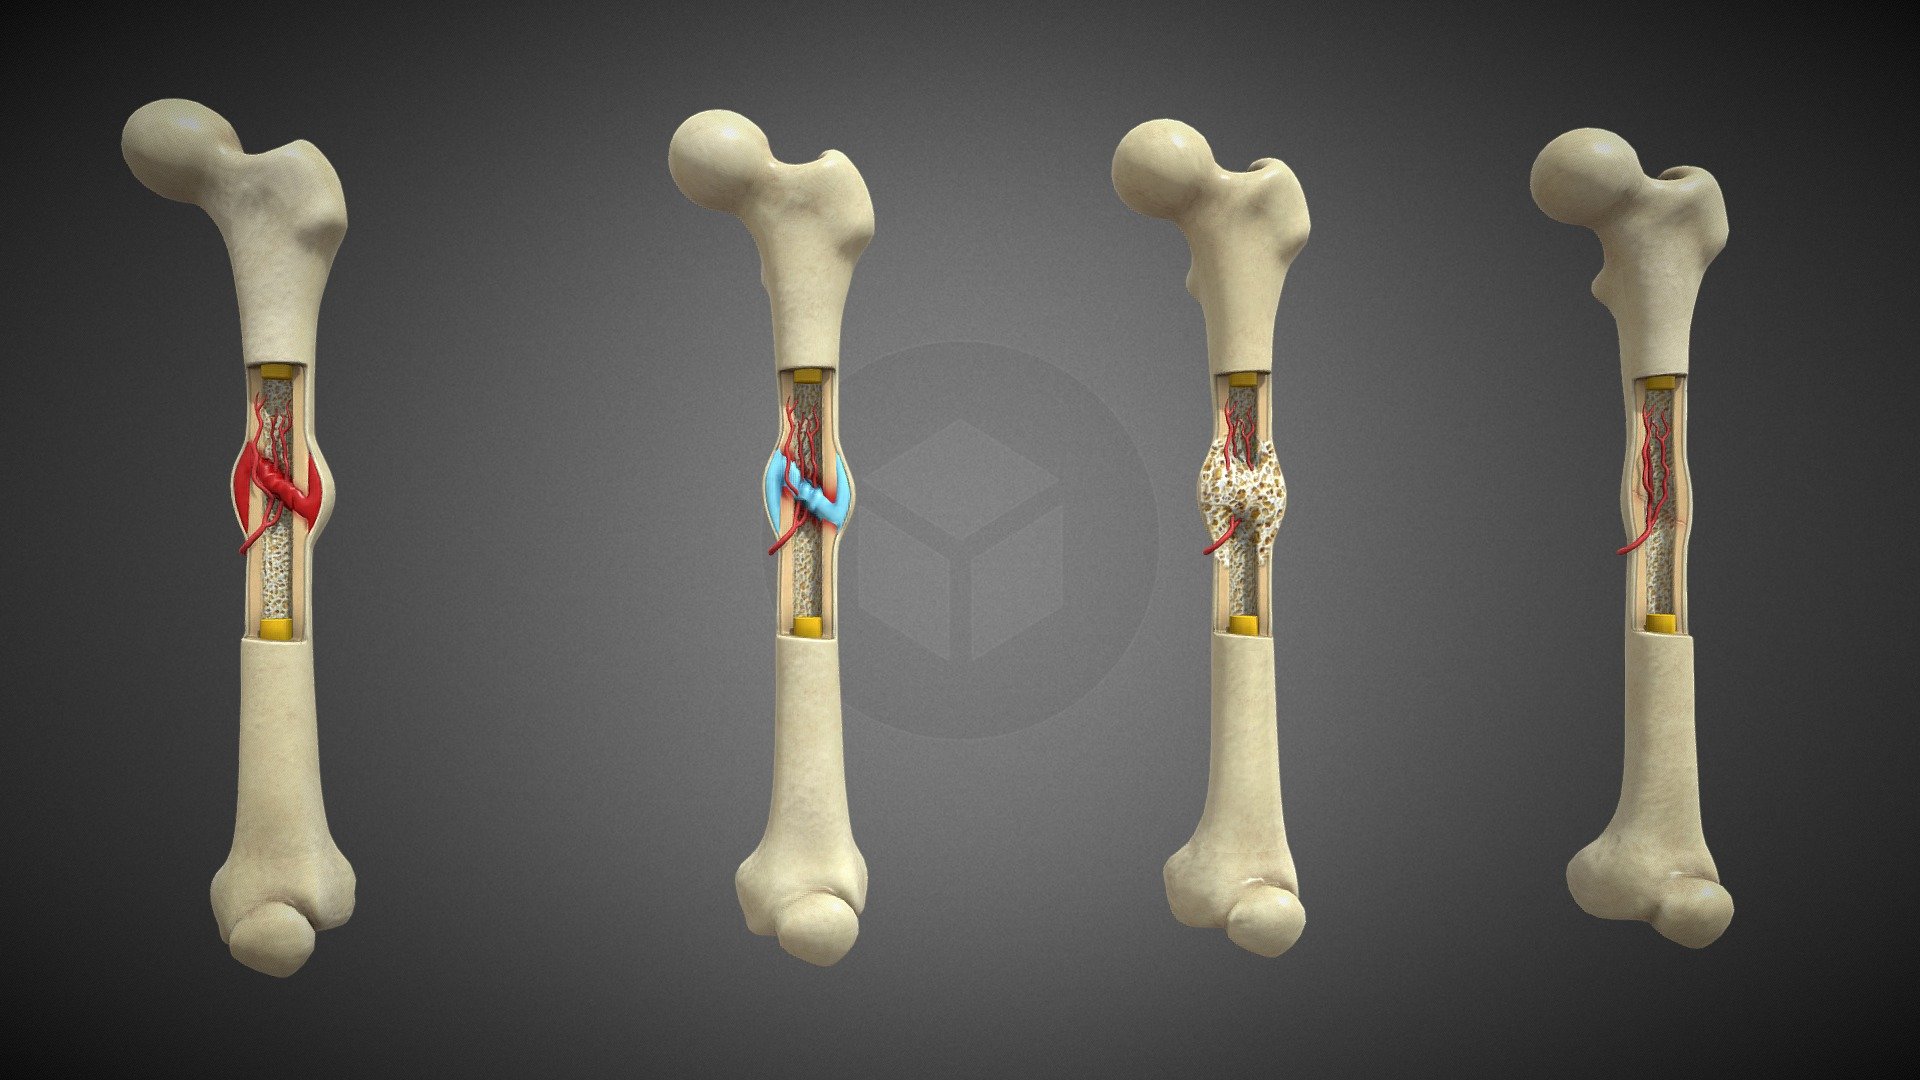 This model consists of Realistic looking of Human Bone Recovery Stages with High quality textures. These models are optimized to be compatible with AR,VR, Games, and 3D animation purposes. 

For Unity3d (Built-in, URP, HDRP) Ready Assets visit our Unity Asset Store Page

Enjoy and please rate the asset!

Contact us on for AR/VR related queries and development support

Gmail - designer@devdensolutions.com

Website

Twitter

Instagram

Facebook

Linkedin

Youtube - Human Bone Recovery Stages - Buy Royalty Free 3D model by Devden 3d model